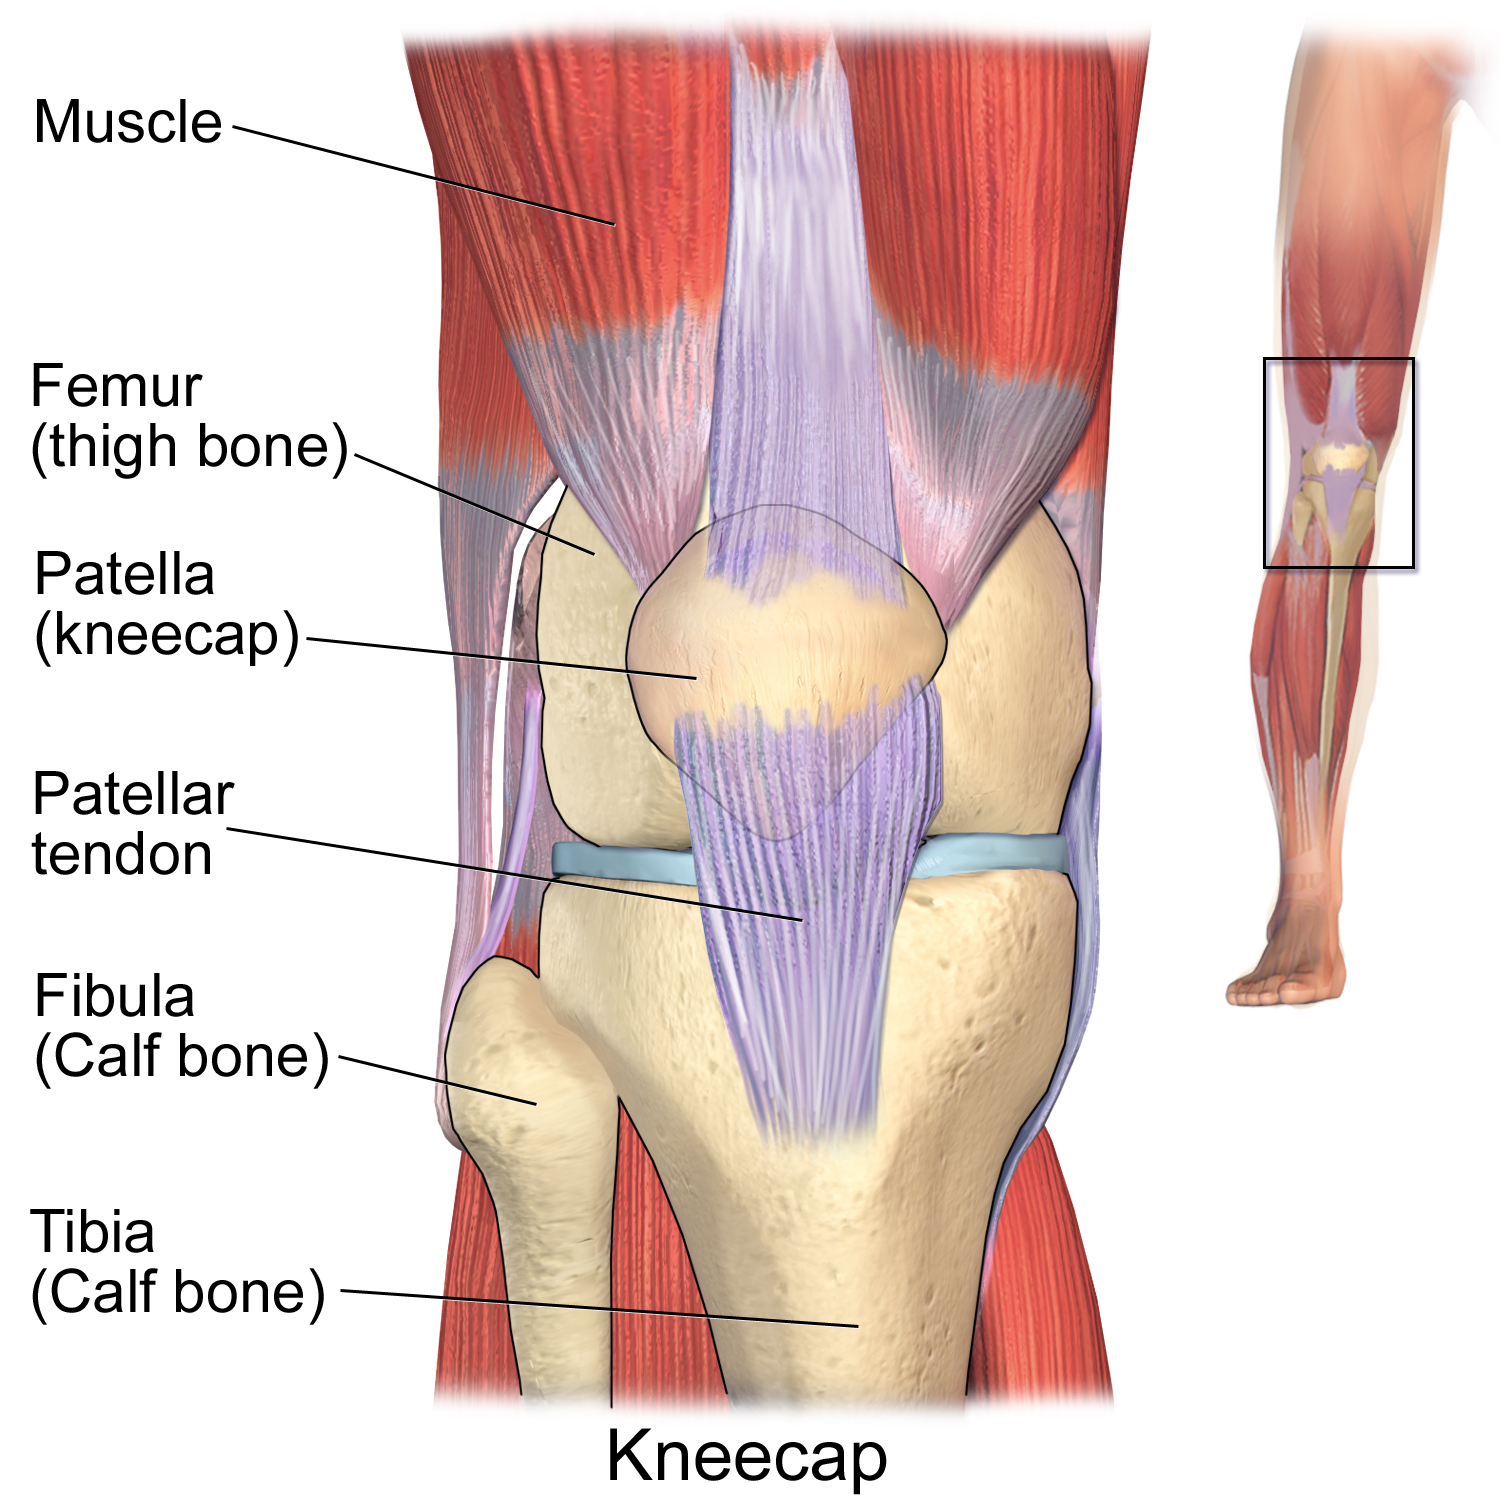 knee dislocation causes